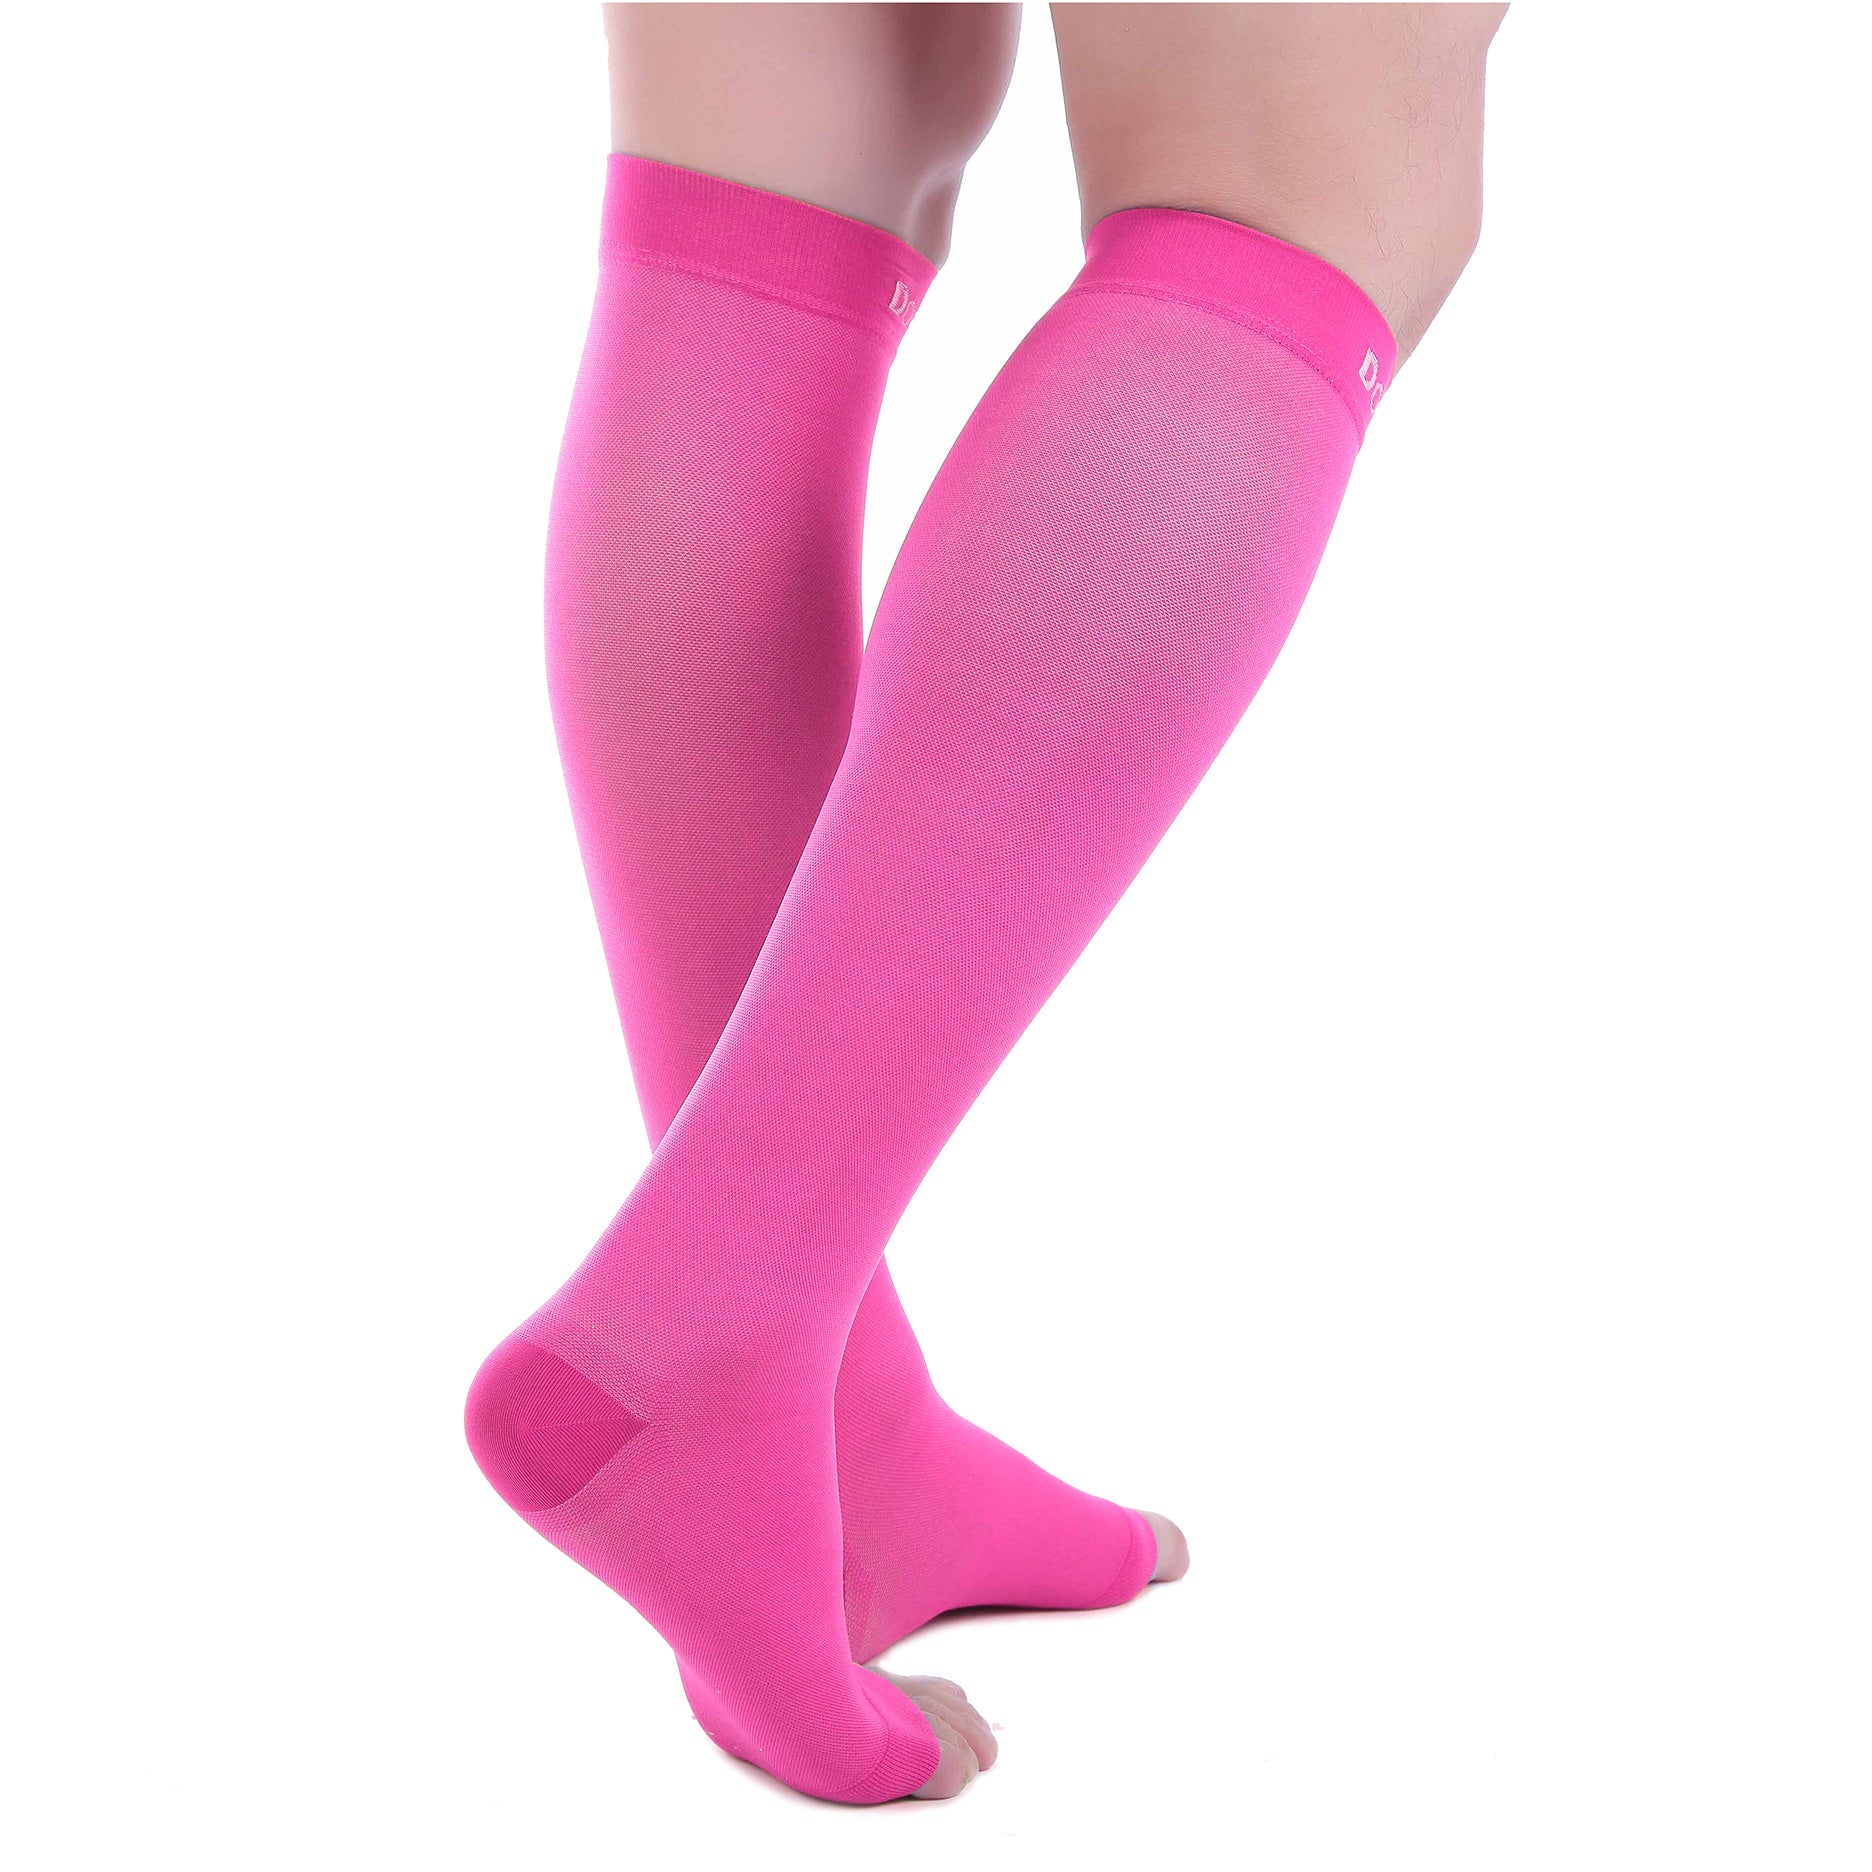 Open Toe Compression Socks 20-30 mmHg PINK by Doc Miller